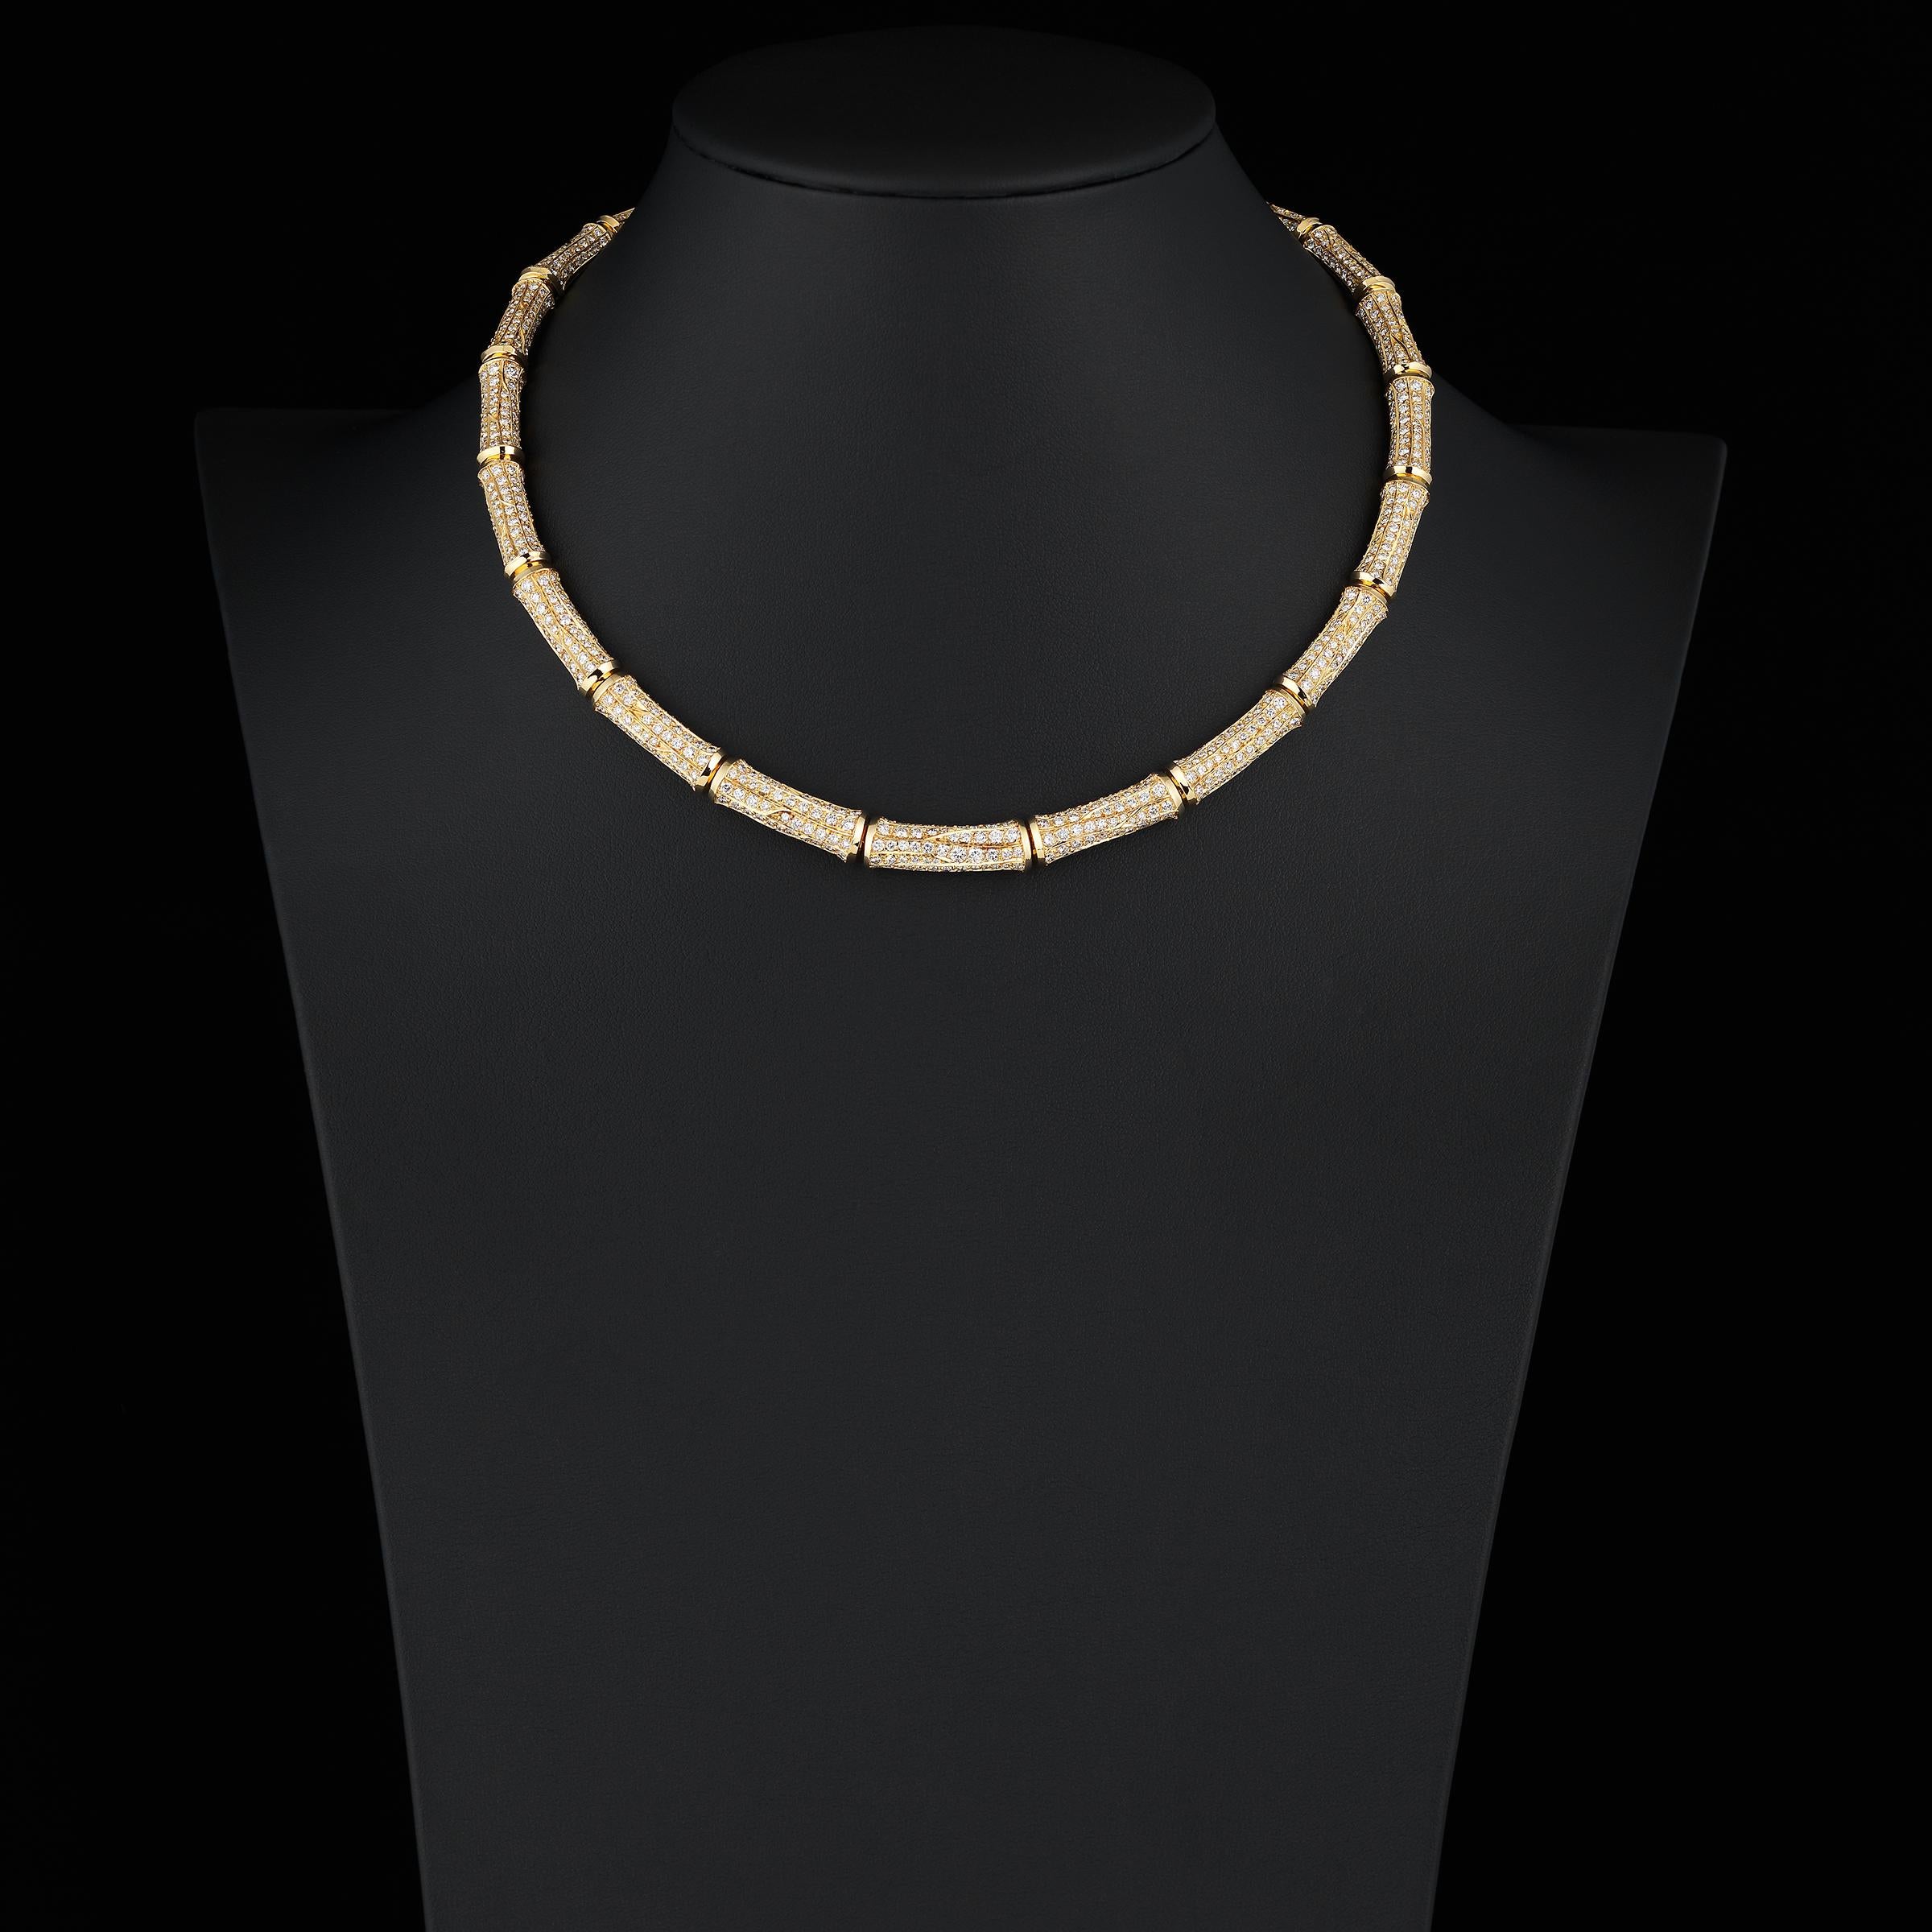 Cartier Bamboo 20cts Diamond Necklace in 18 Karat Gold In Excellent Condition For Sale In Dallas, TX